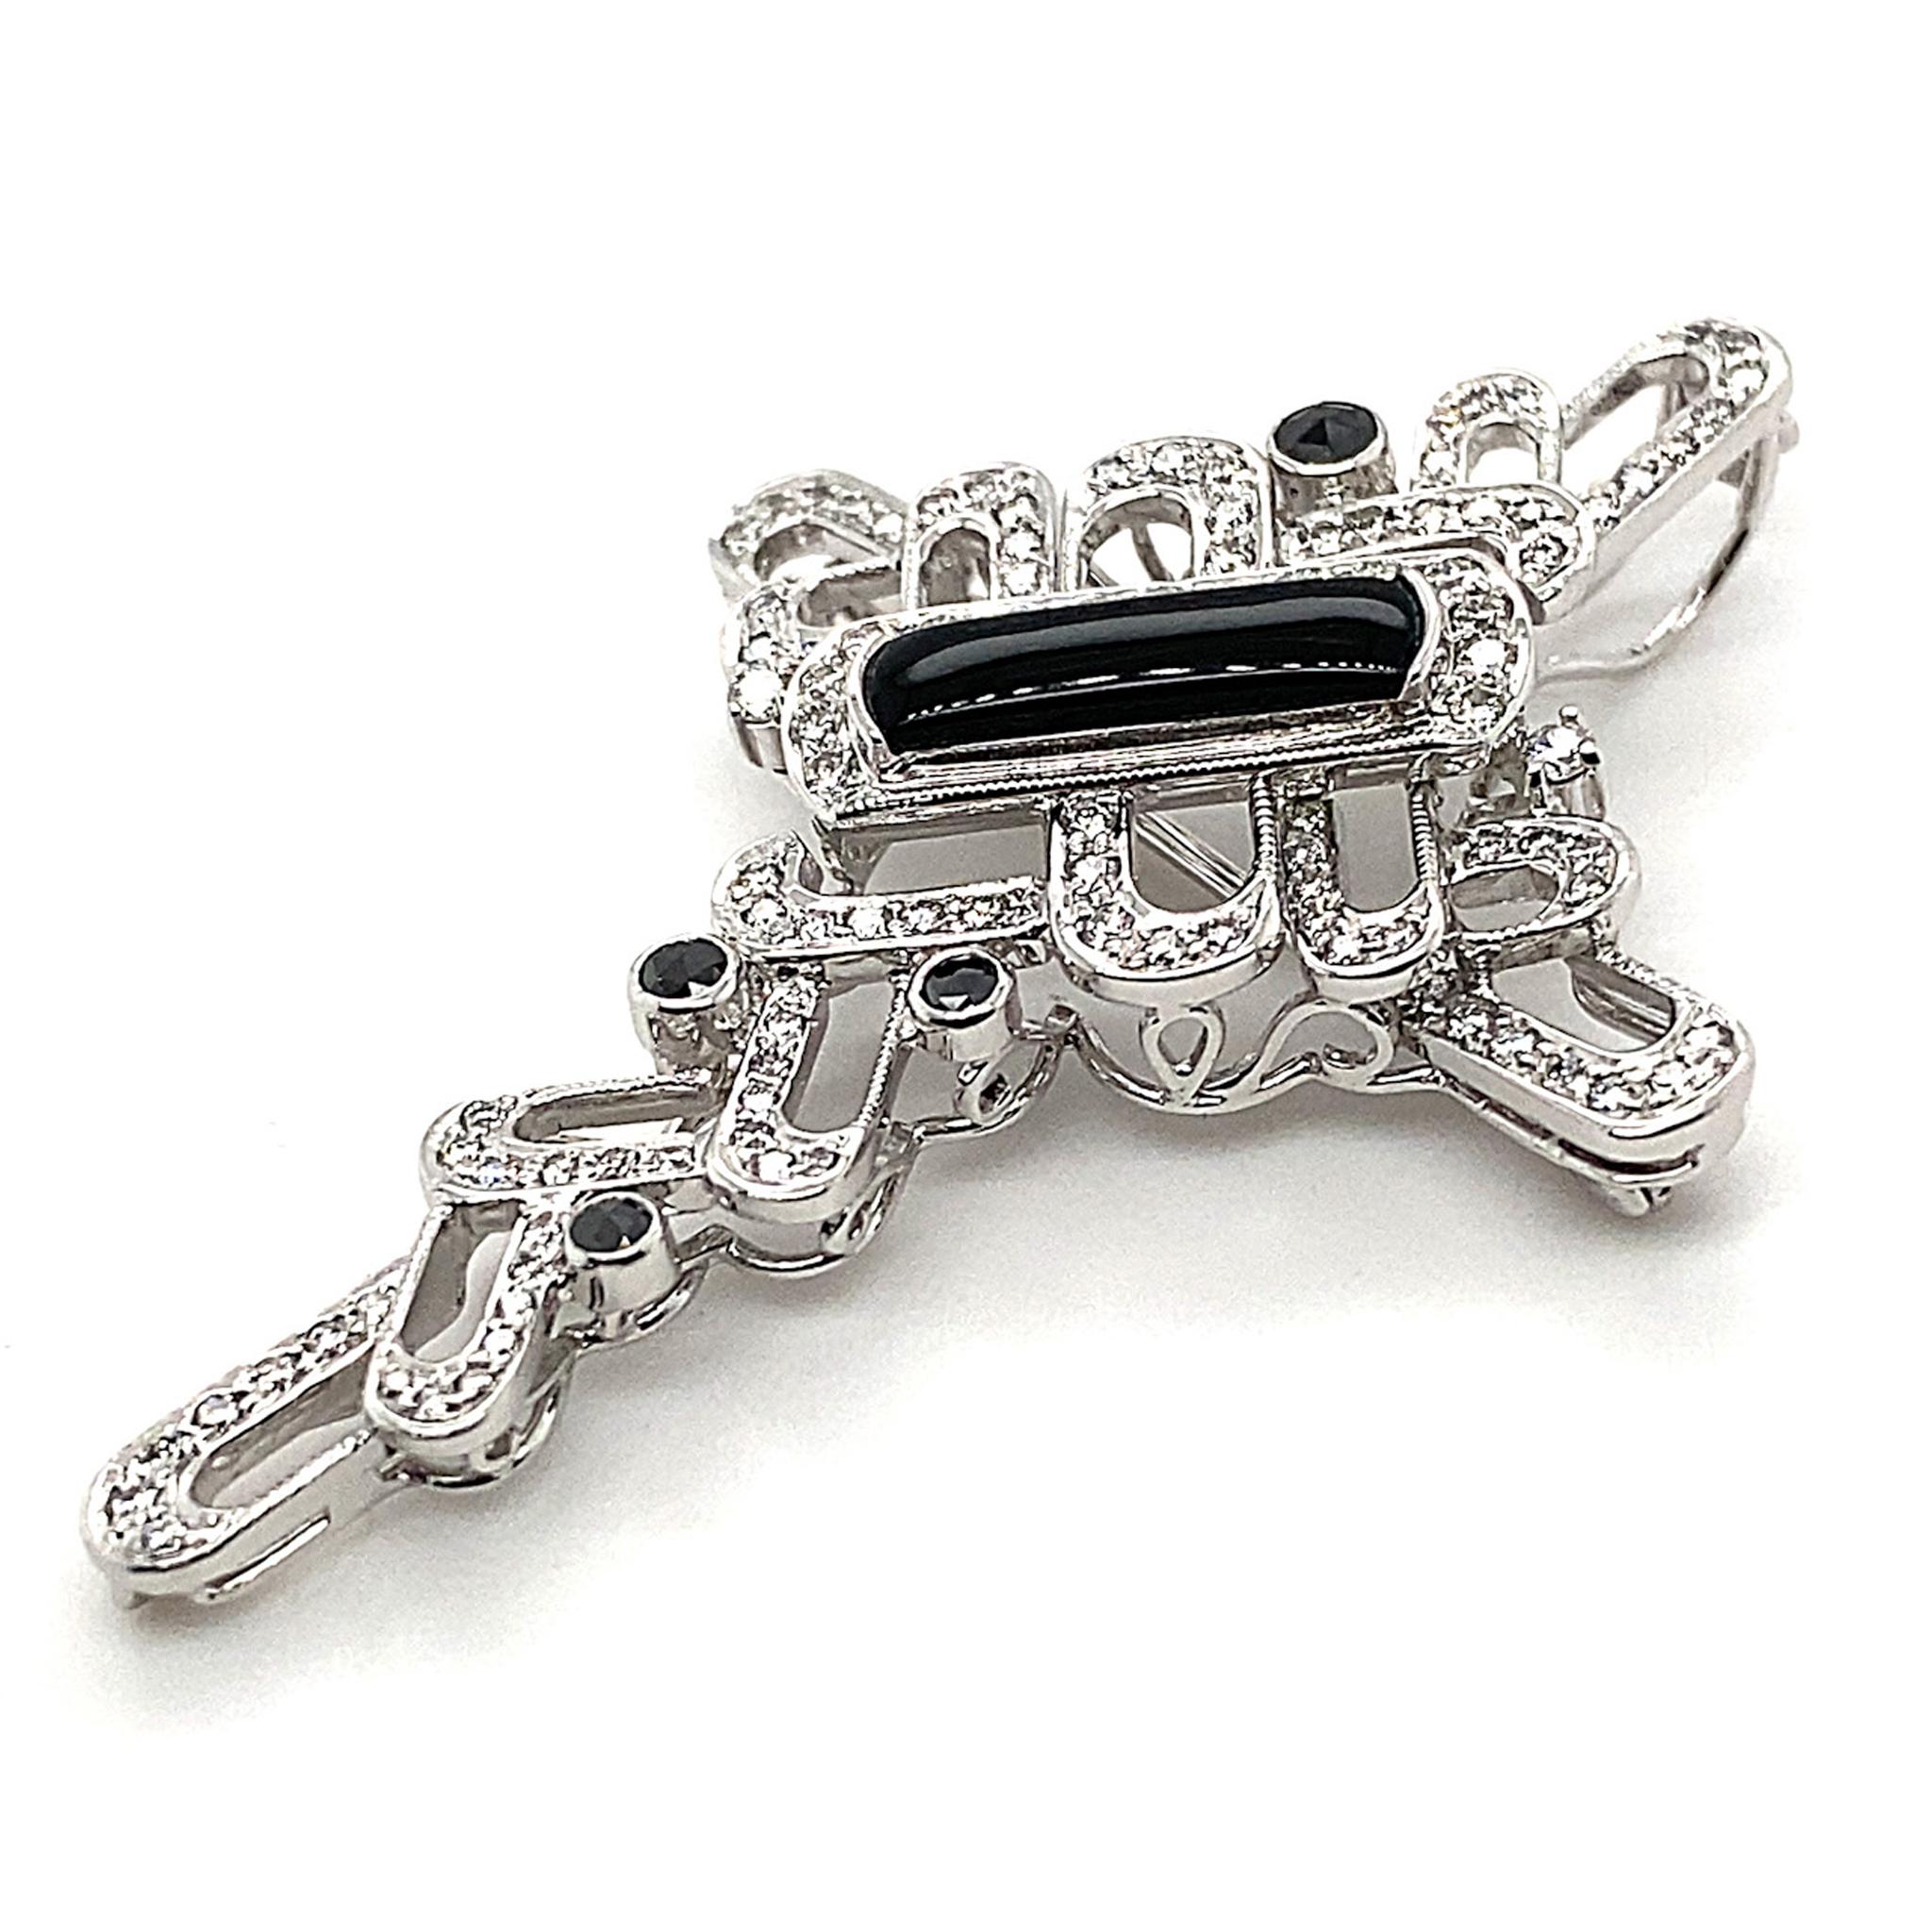 This ribbon-wrapped cross brooch gives the timeless symbol a modern twist. Mounted in 18K White Gold, the intricate and beautifully worked ribbon and cross motif are set with an Agate, weighing 0.48ct, 109 Collection Grade Round Diamonds totalling